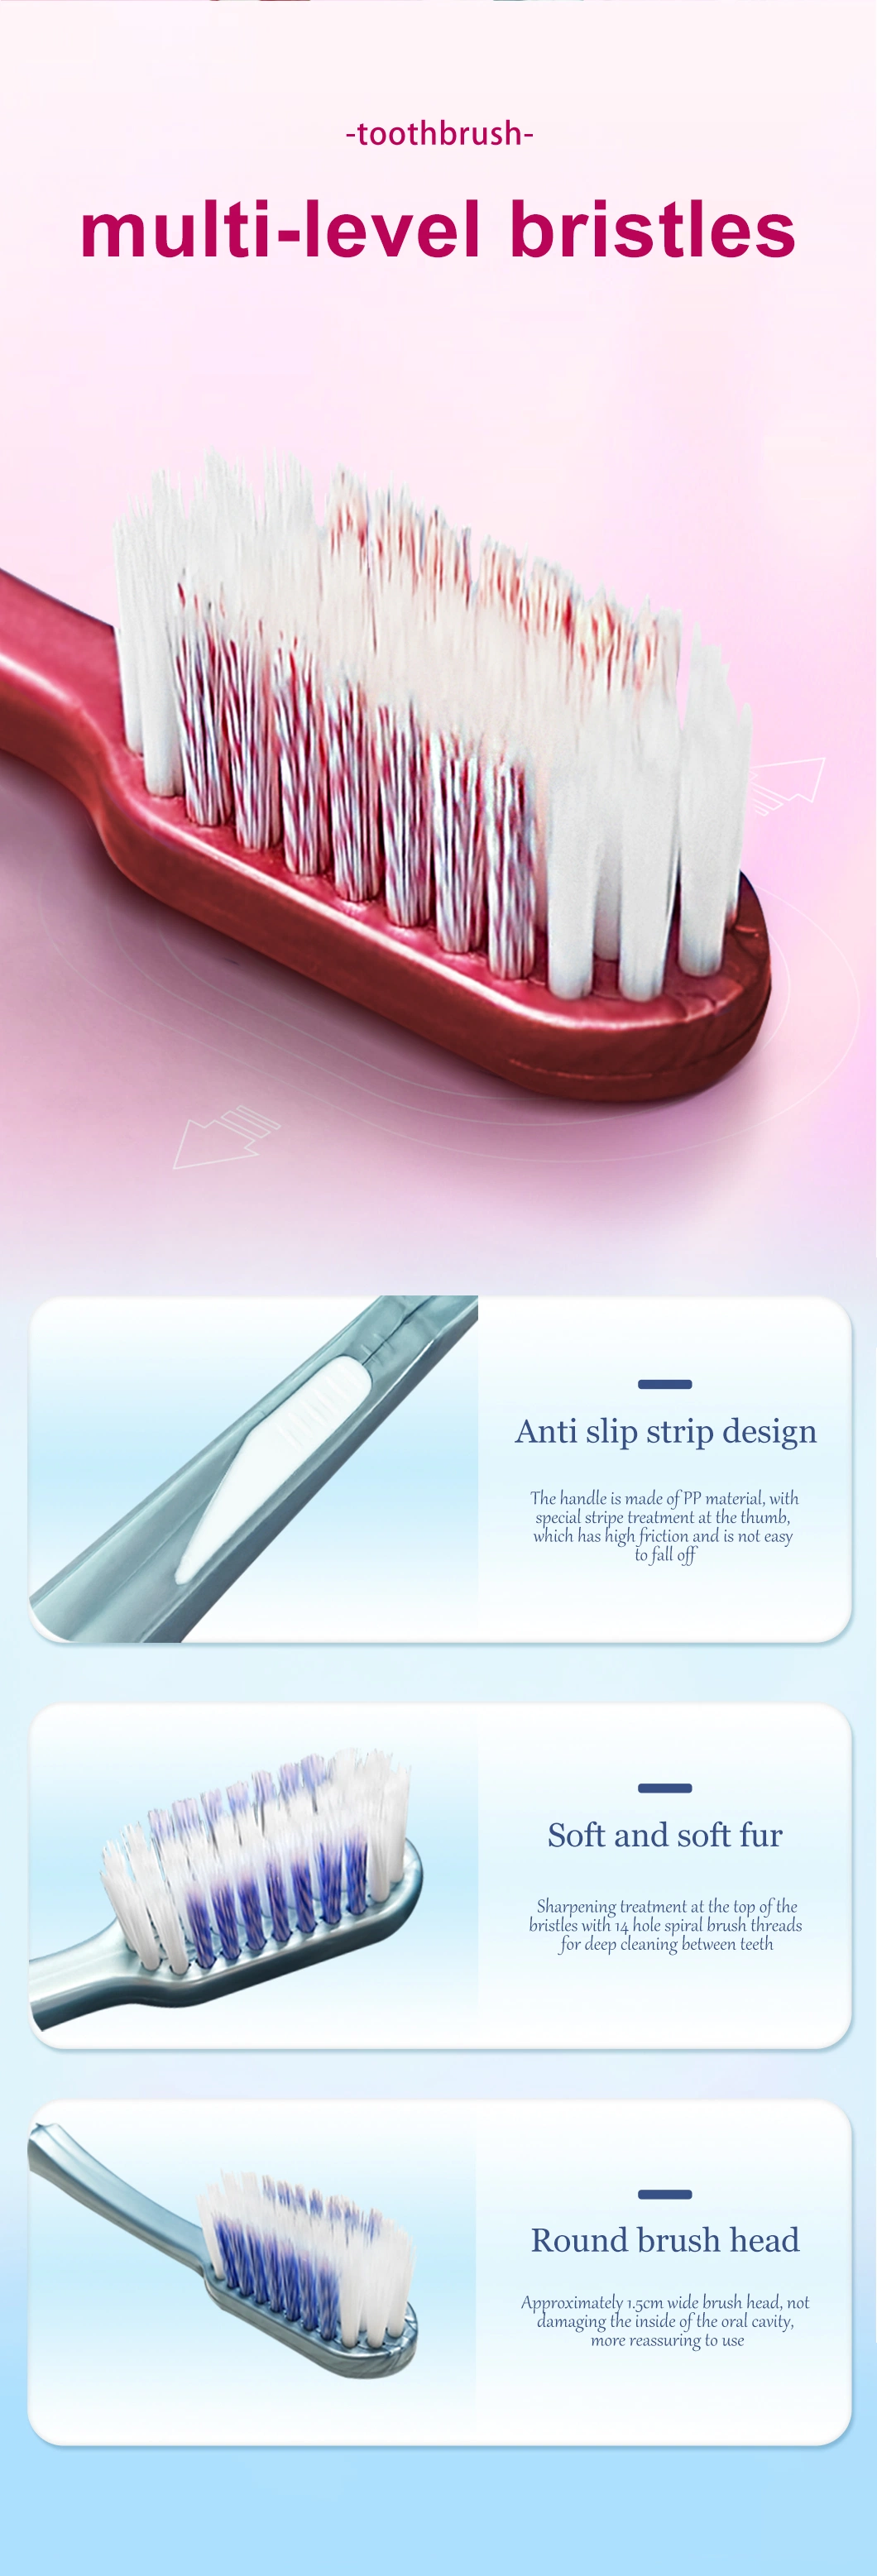 Good Quality Fast Delivery Custom Logo Speical Design Hot Sell Adult Toothbrush